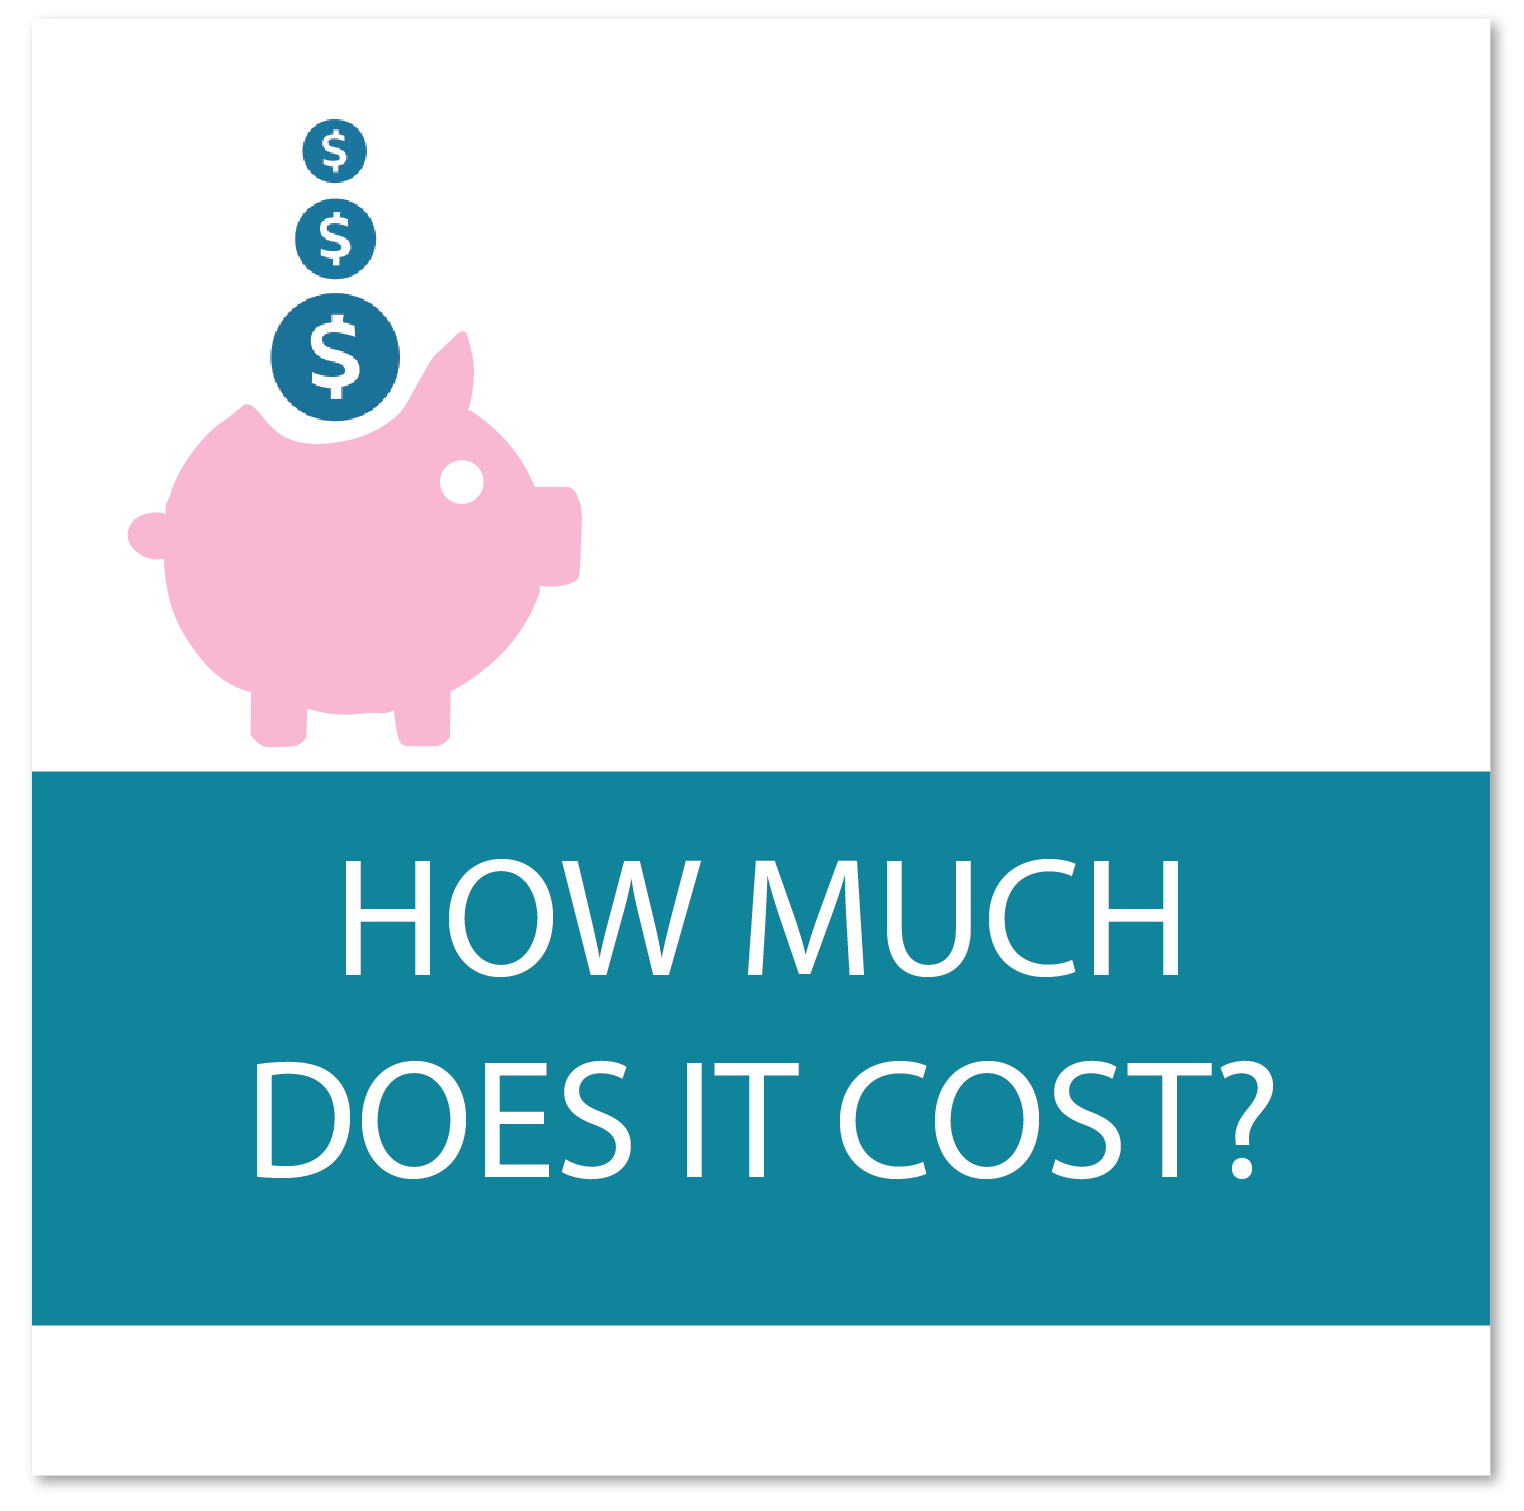 How Much Does The New Flat Rate Cost? Plumbing Price Book HVAC Flat Rate Plumbing Flat Rate HVAC price Book Electrical Price Book Electrical Flat Rate